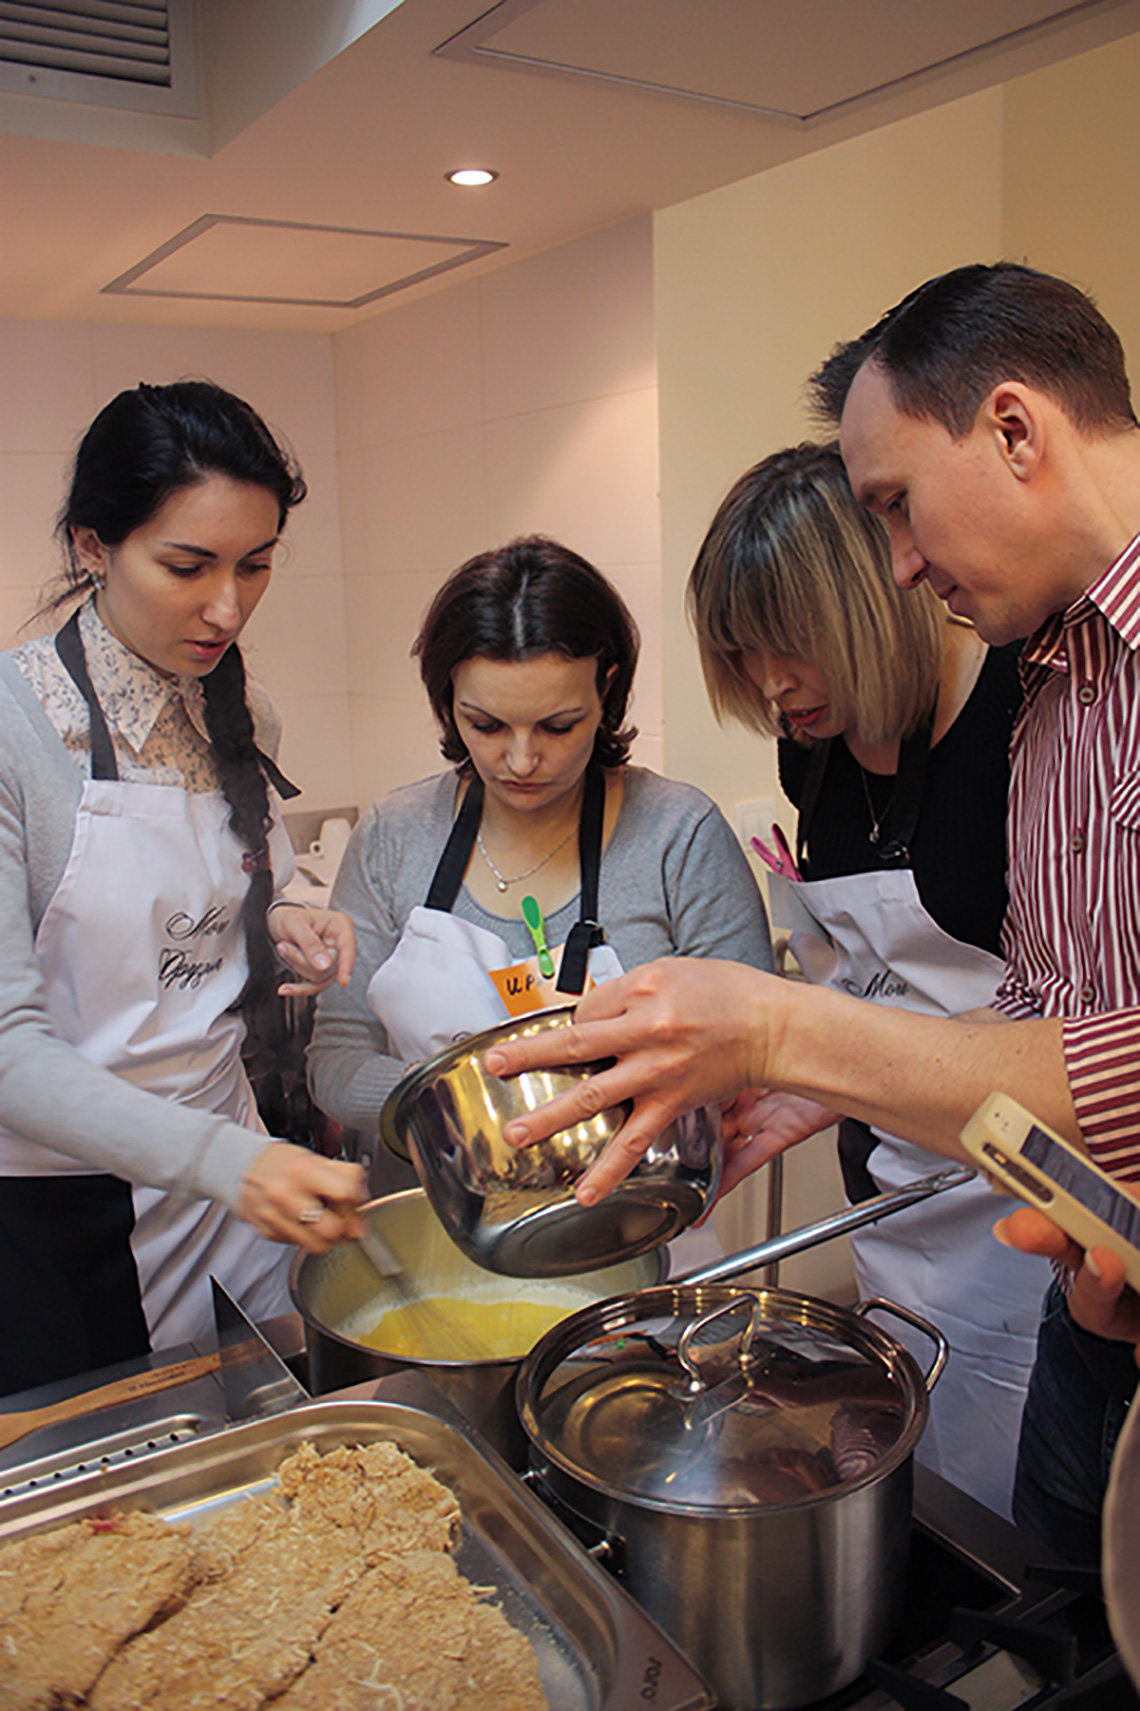 Polenta. Course "Culinary Traditions of Northern Italy". Cooking school in Ukraine.